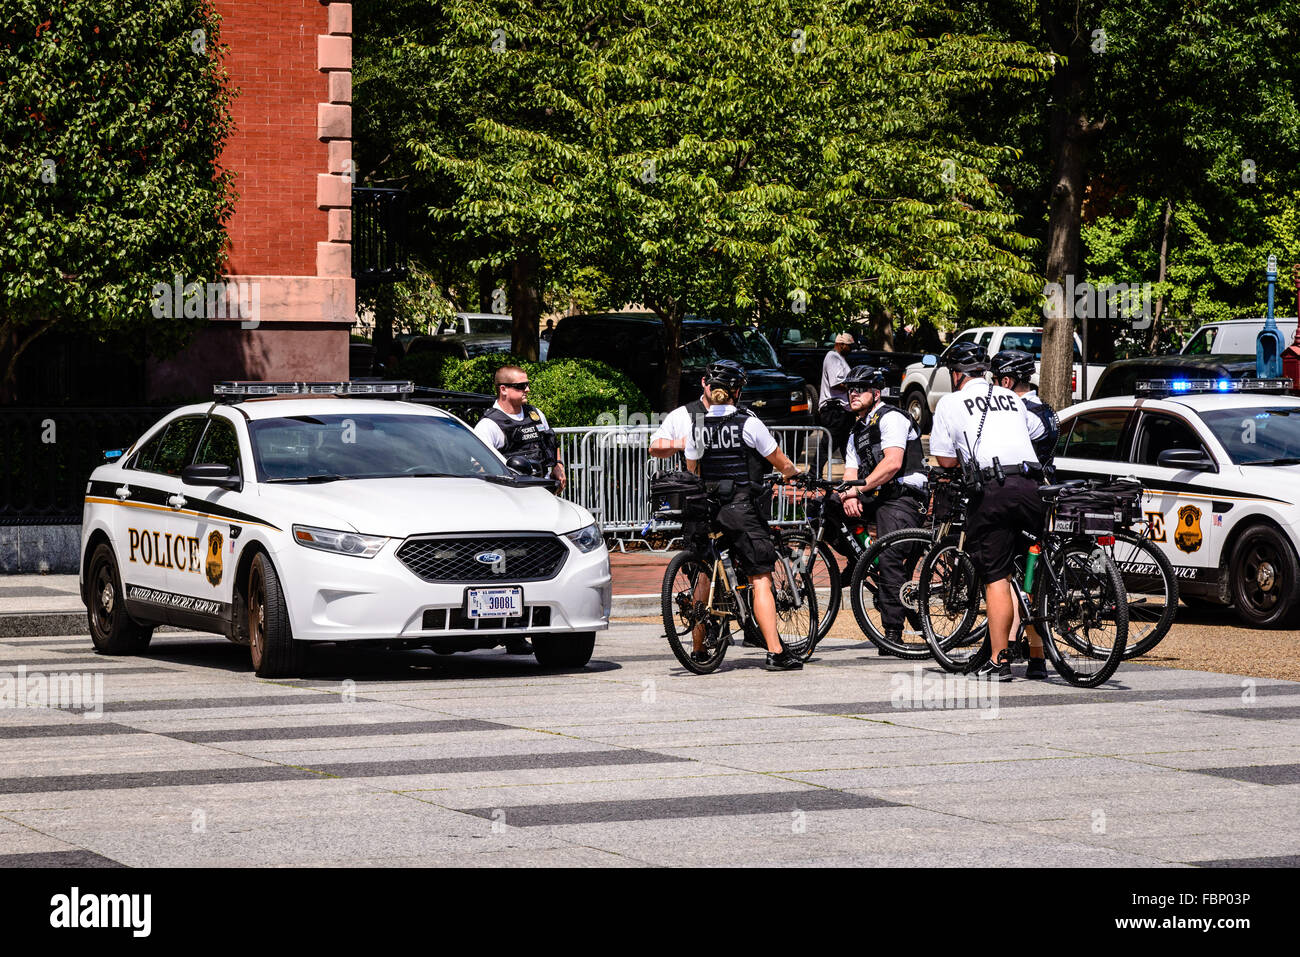 Group of United States Secret Service Police Cyclists and Ford Taurus Police Car, Washington, DC Stock Photo